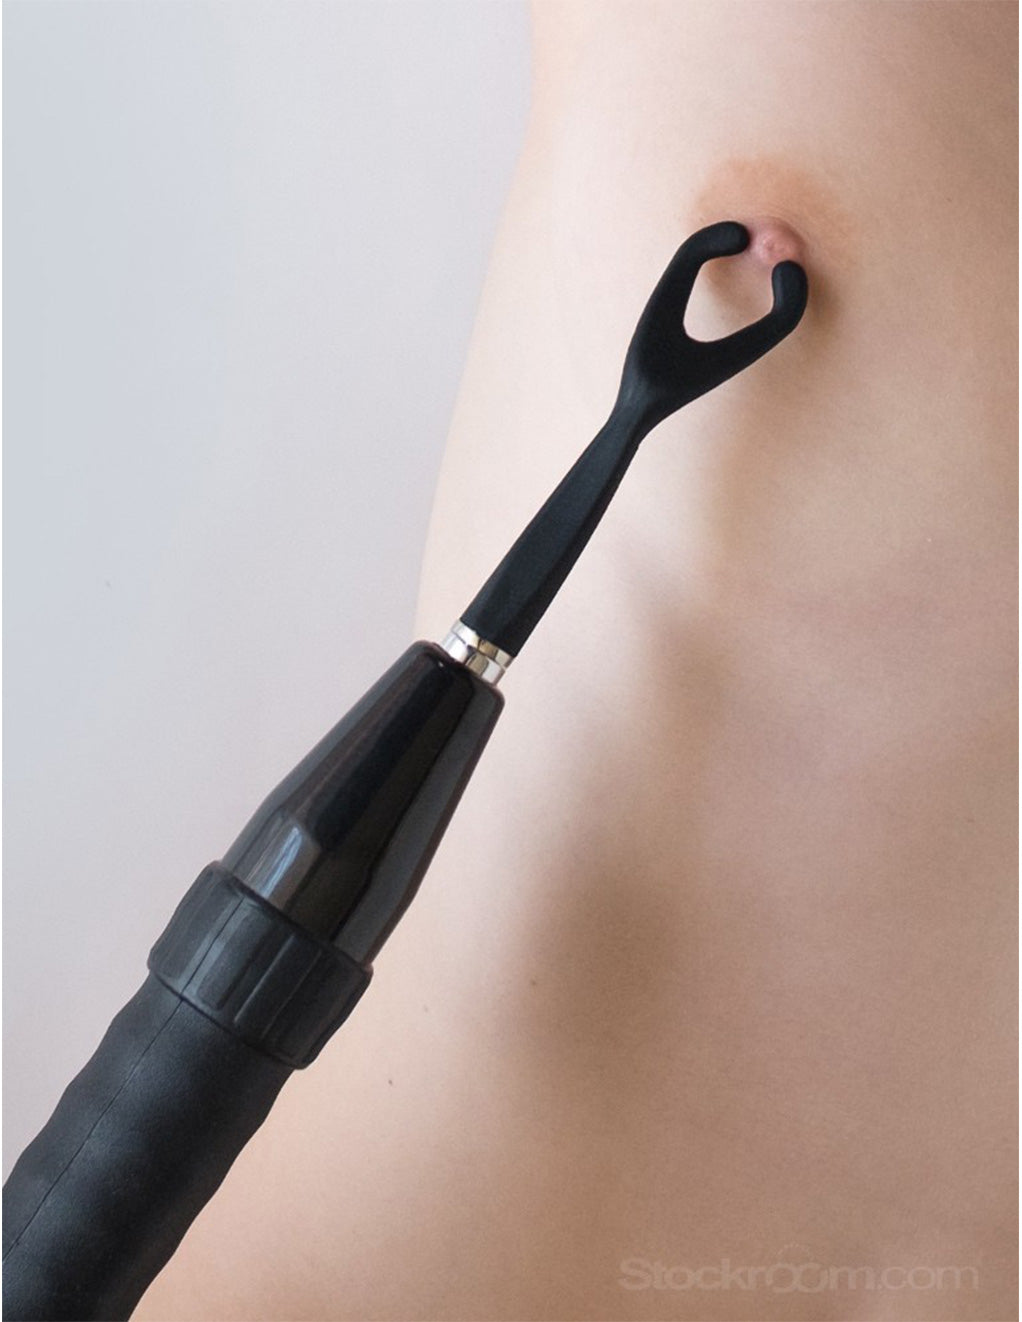 Kinklab Flex Capacitor Neon Wand Attachment- In use